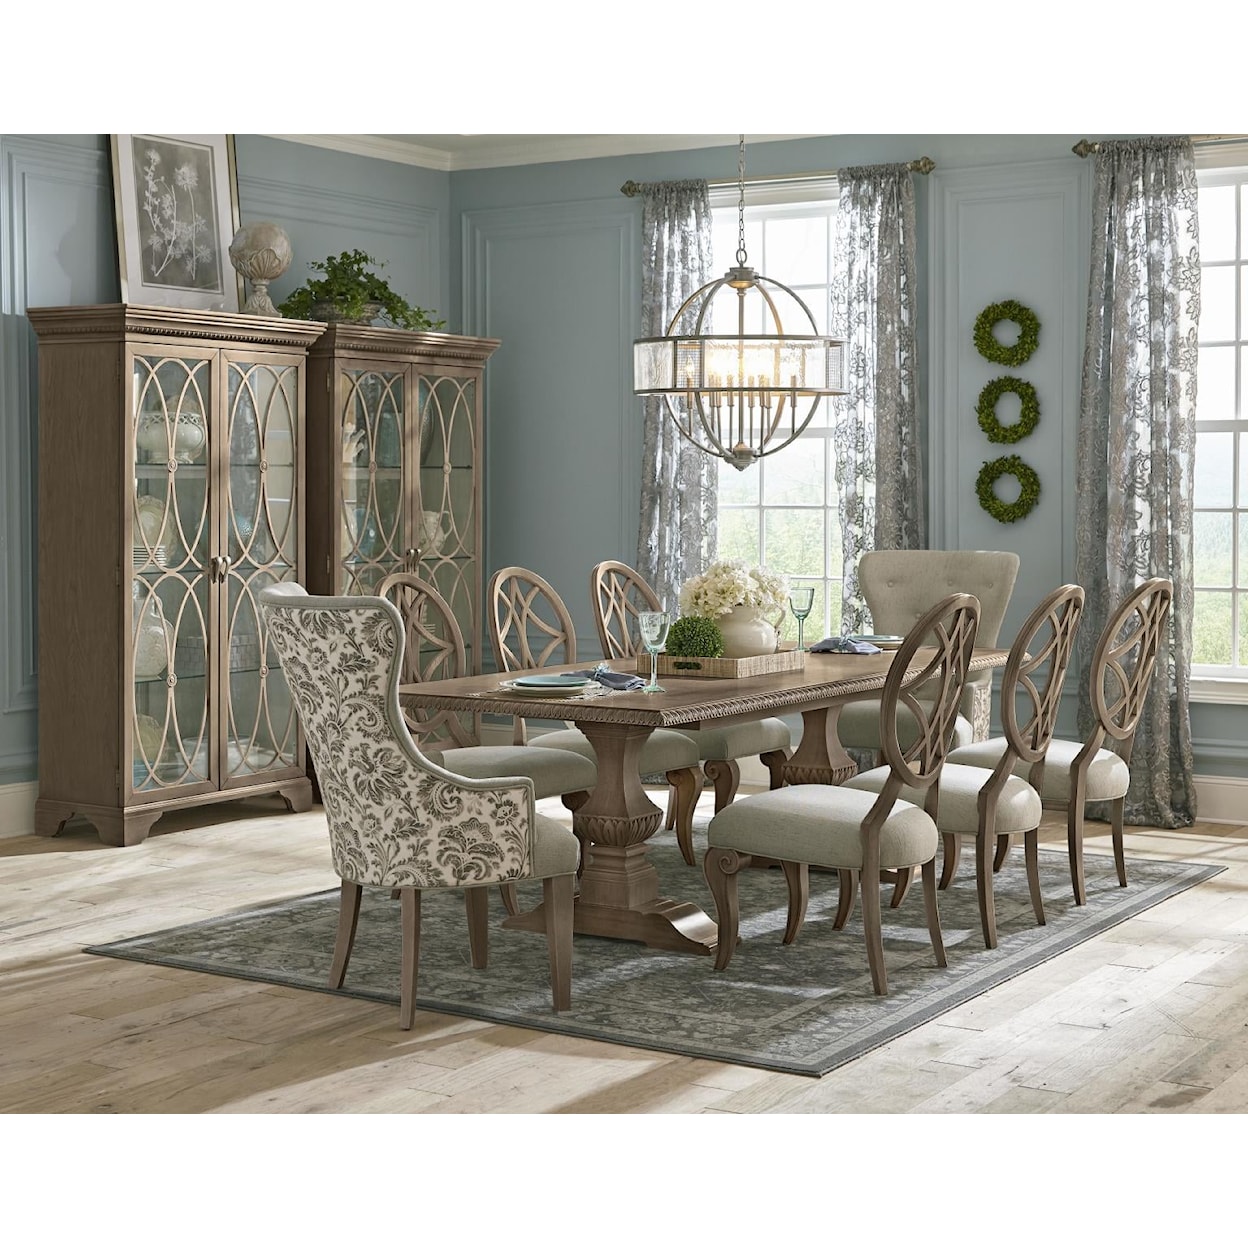 Trisha Yearwood Home Collection by Legacy Classic Jasper County Chair